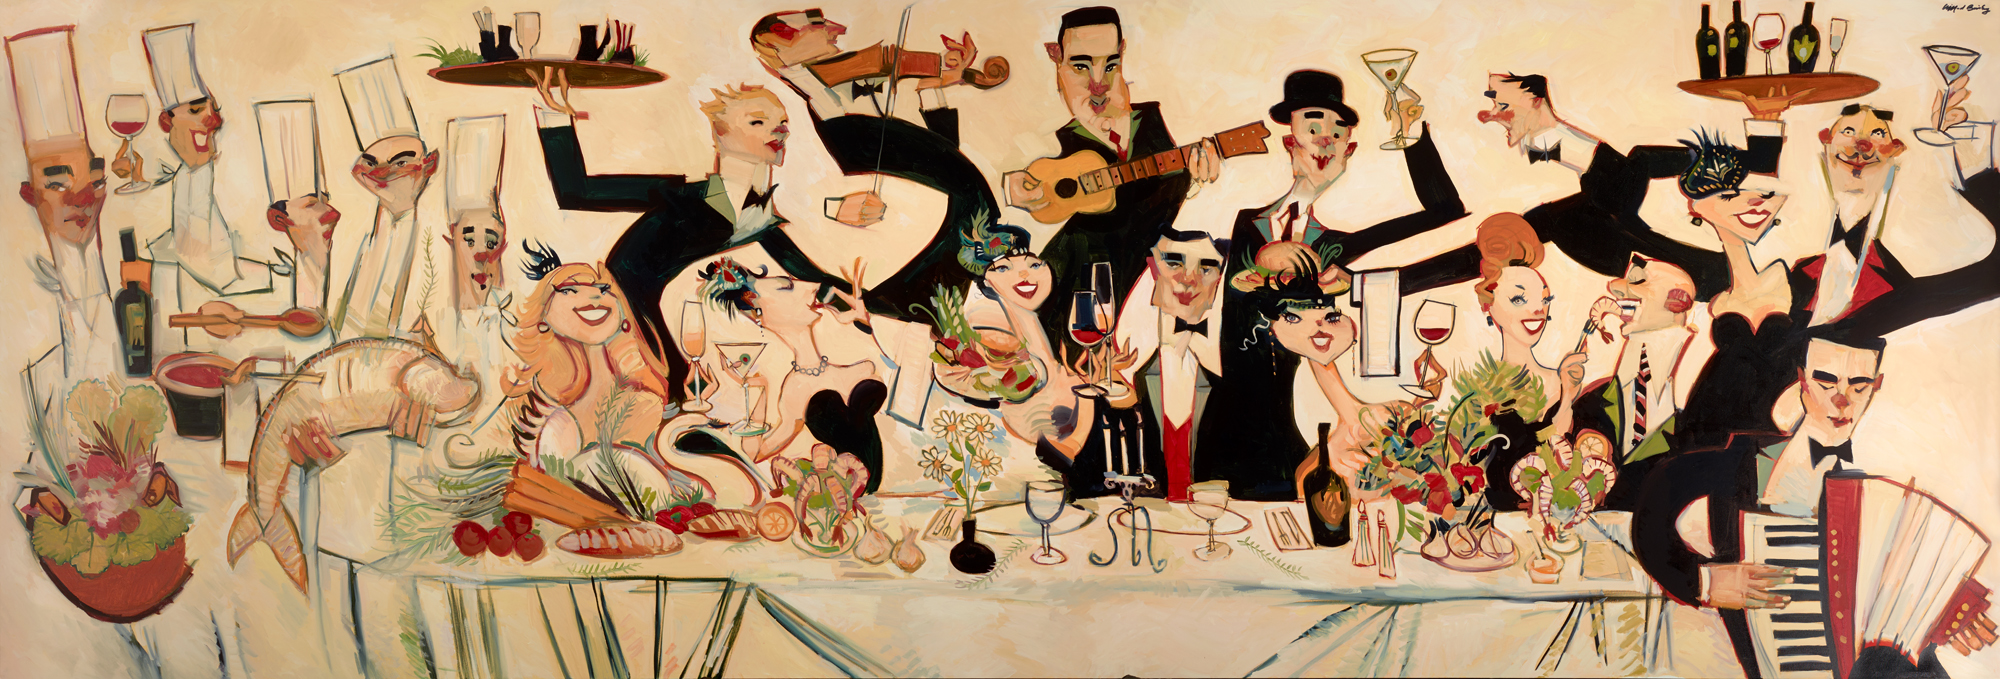 The Big Table Giclee by Clifford Bailey Fine Art